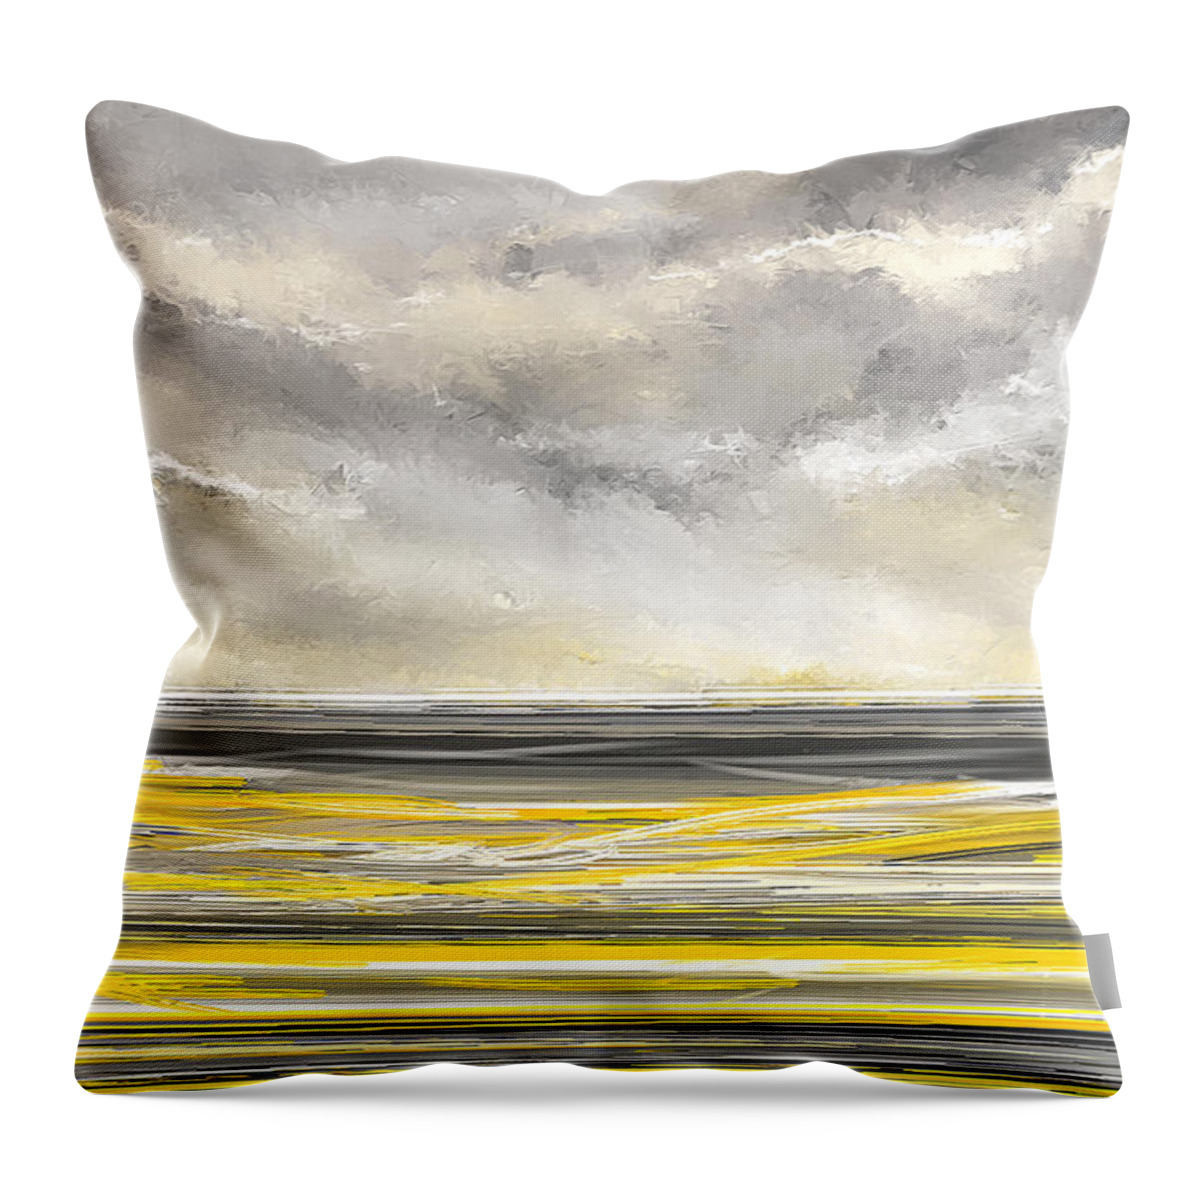 Yellow Throw Pillow featuring the painting Yellow And Gray Seascape Art by Lourry Legarde